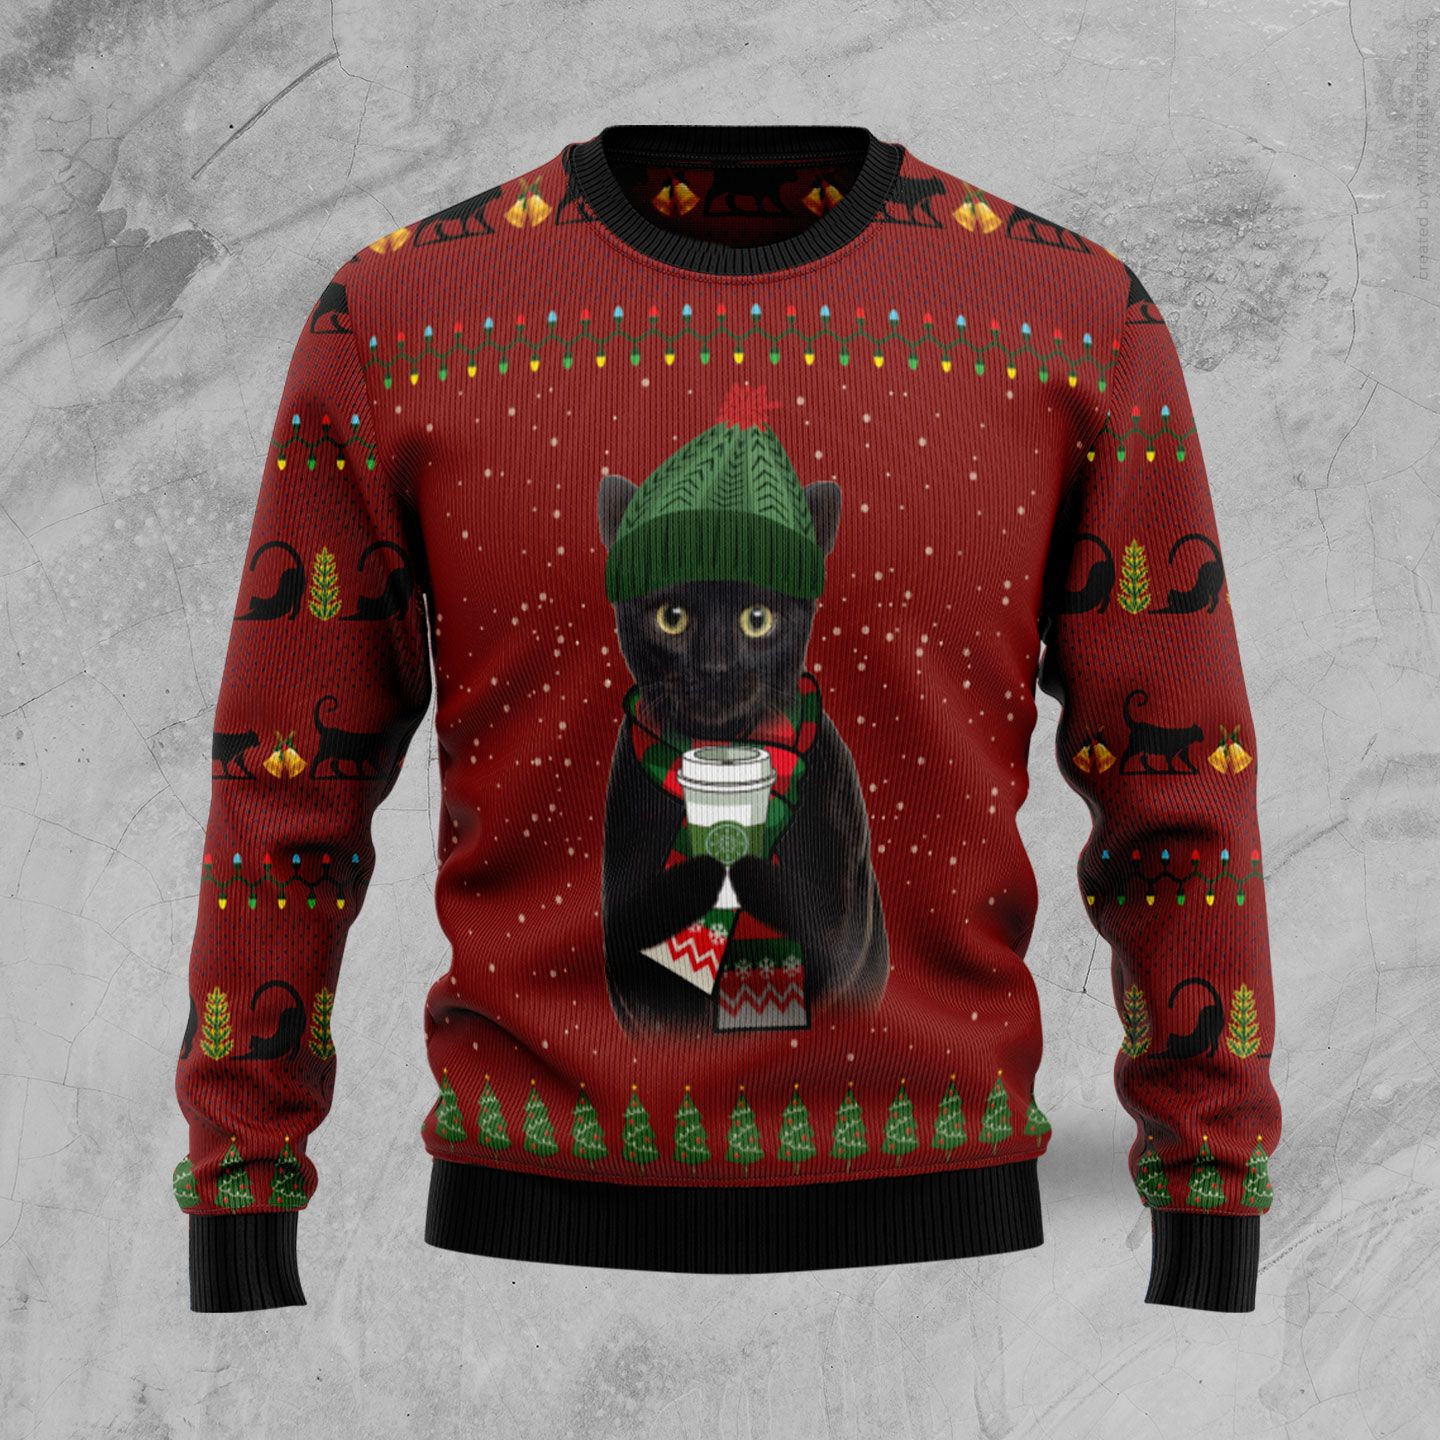 Black Cat Coffee Ugly Christmas Sweater Ugly Sweater For Men Women, Holiday Sweater